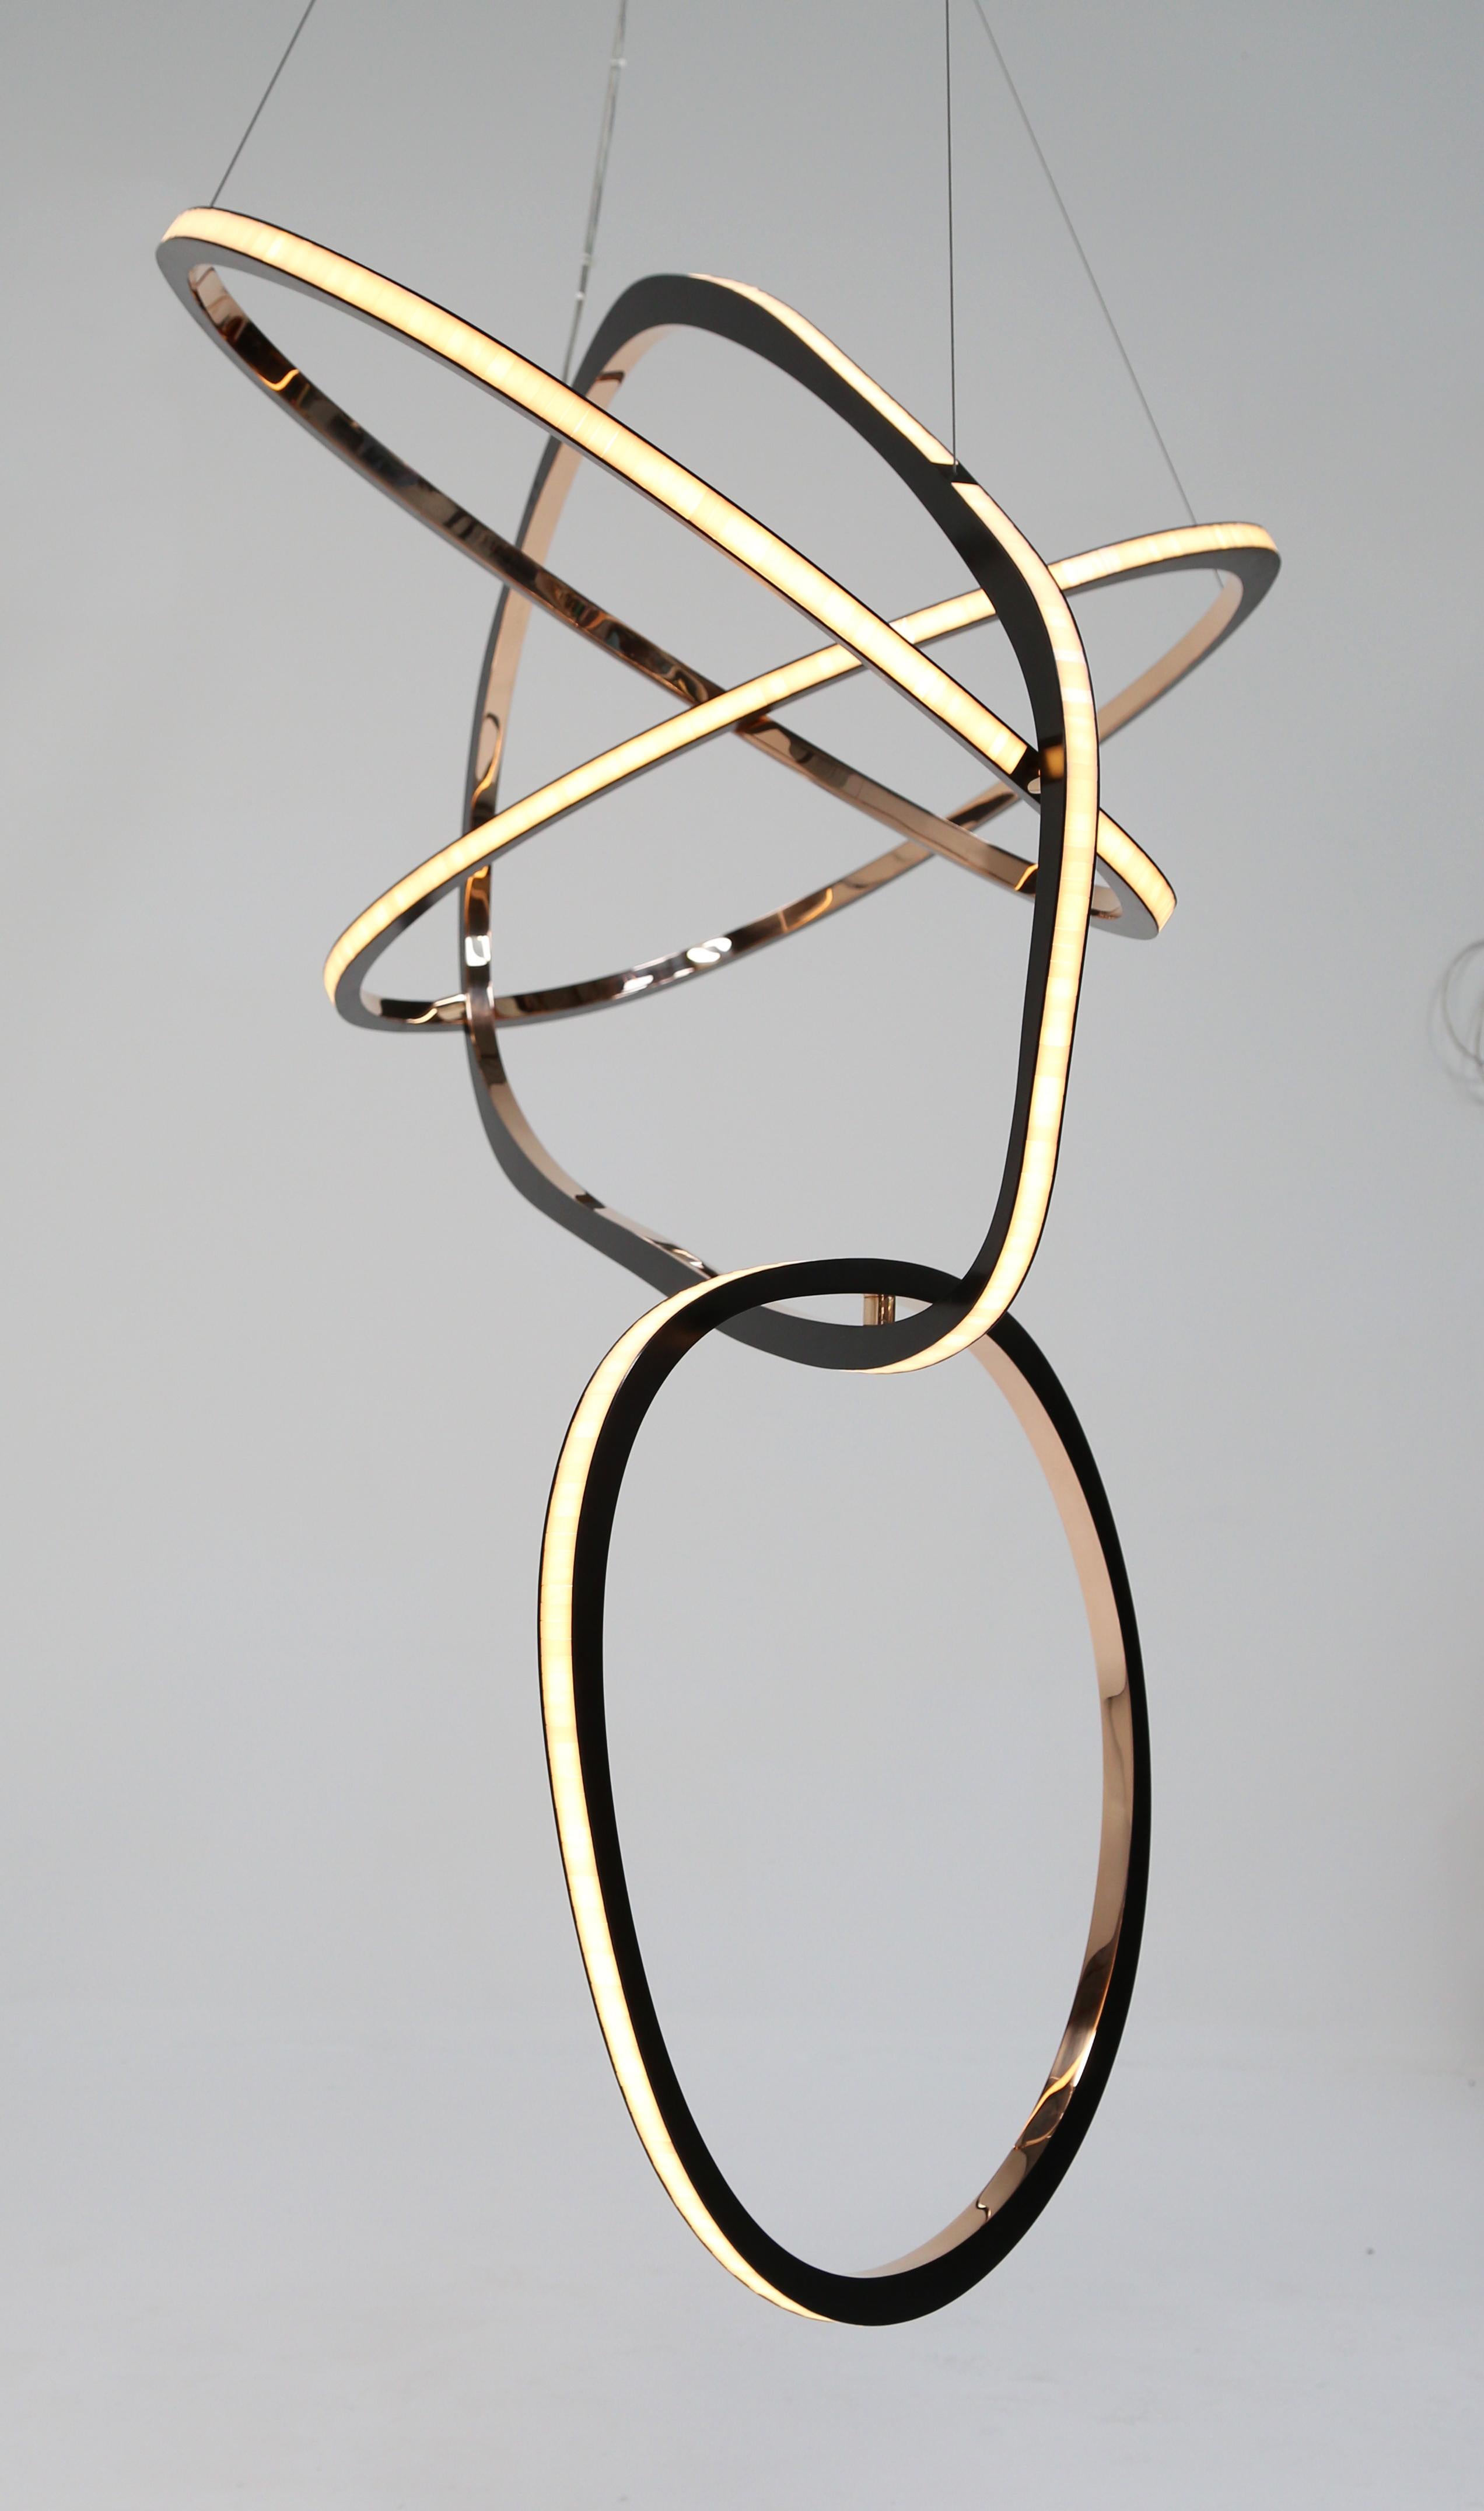 Irish sculptor Niamh Barry is inspired by natural forms, and she often conveys human motion with ellipses of fluid, sinuous lines (similar to those used in rapid anatomical drawings) that shed the rigidity of symmetrical geometries. She further